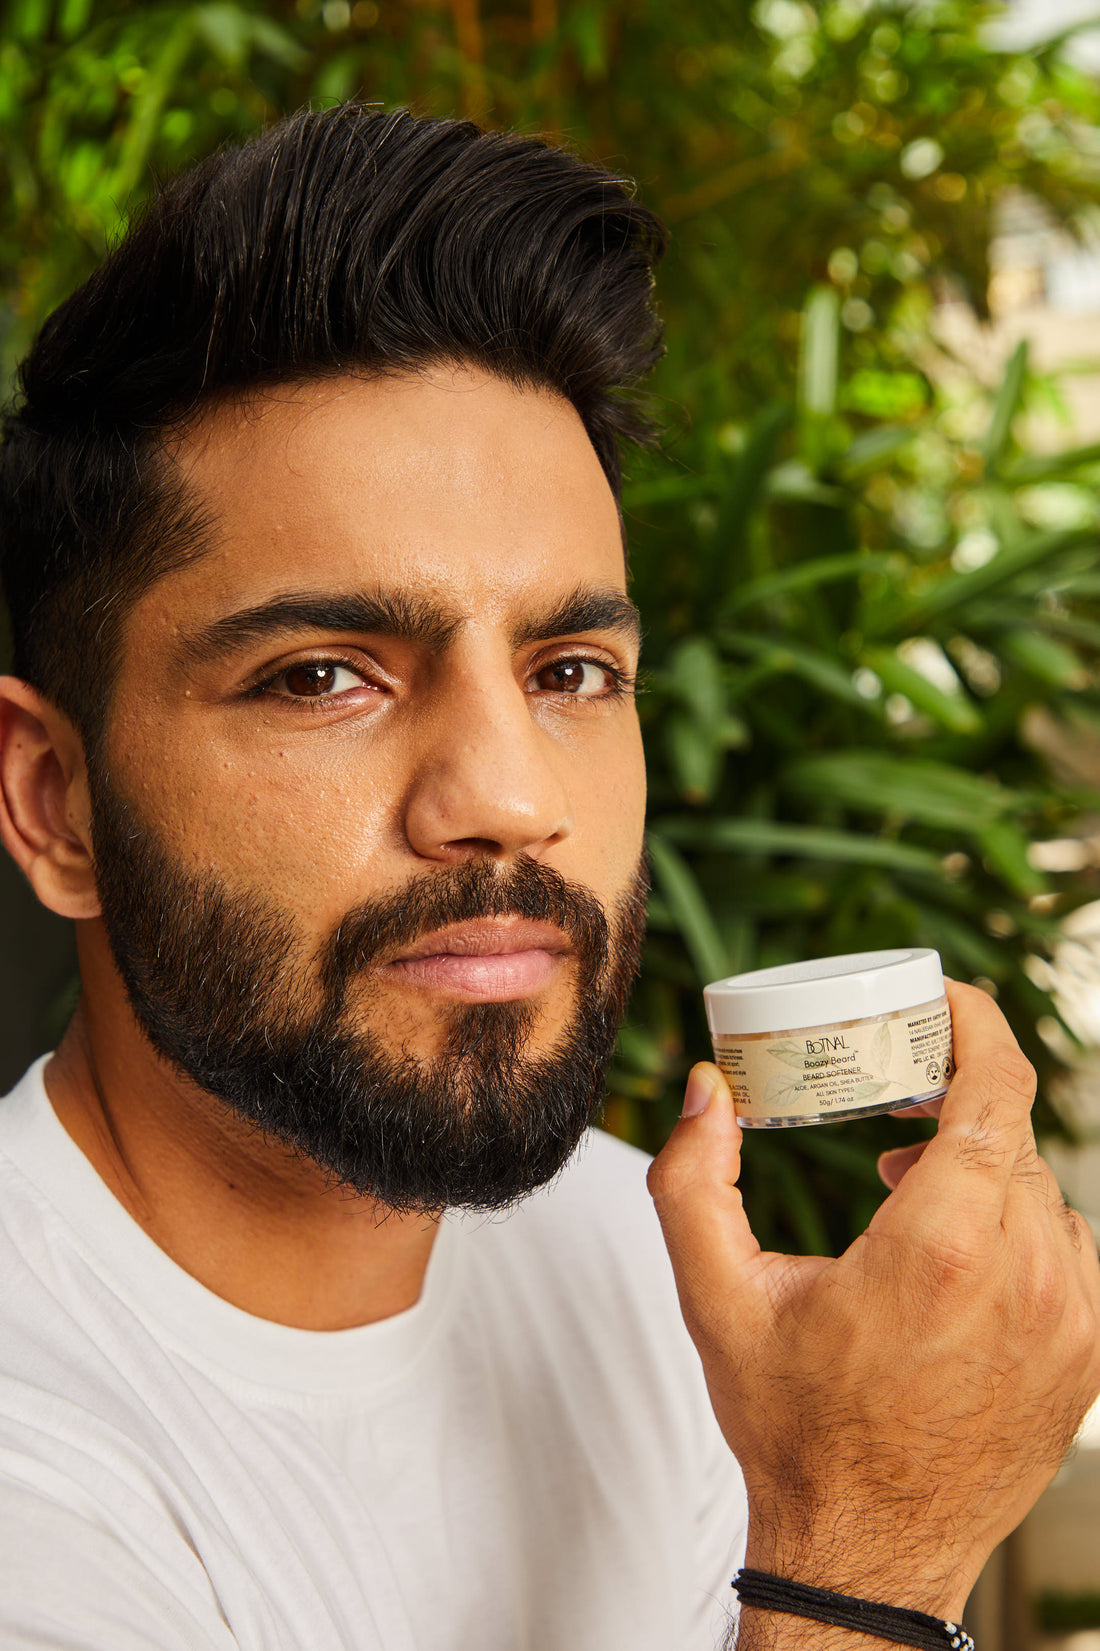 Say Goodbye To Prickly Beard And Acne With The Best Solution!